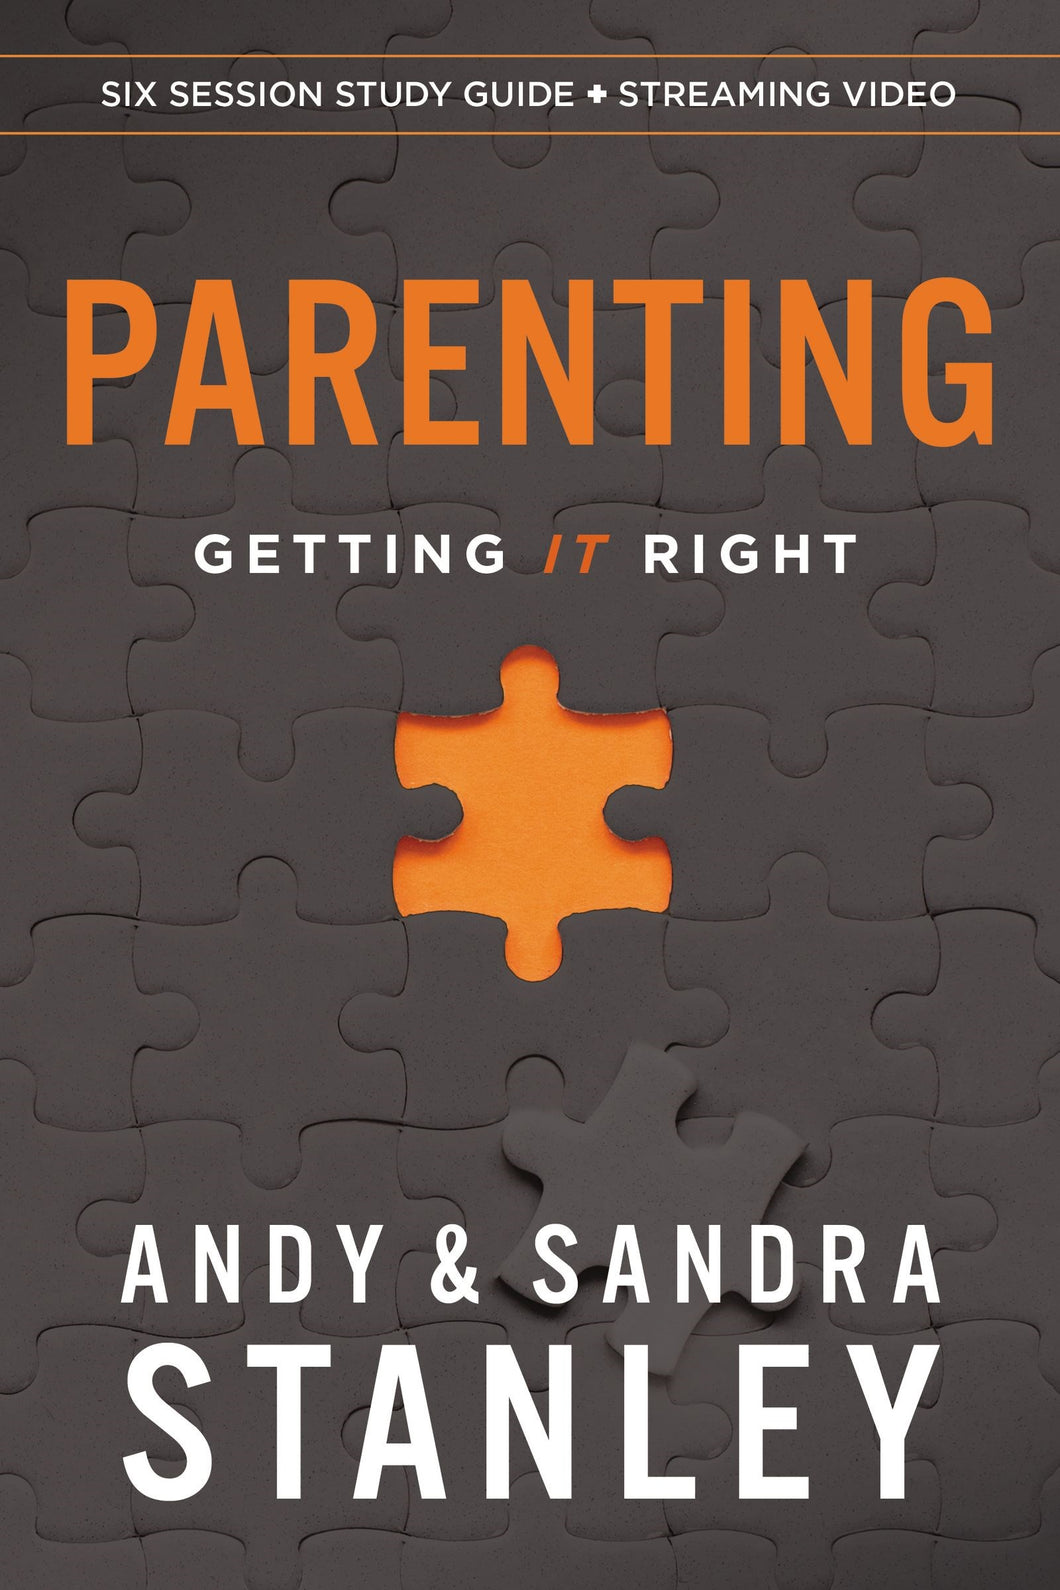 Parenting Study Guide plus Streaming Video